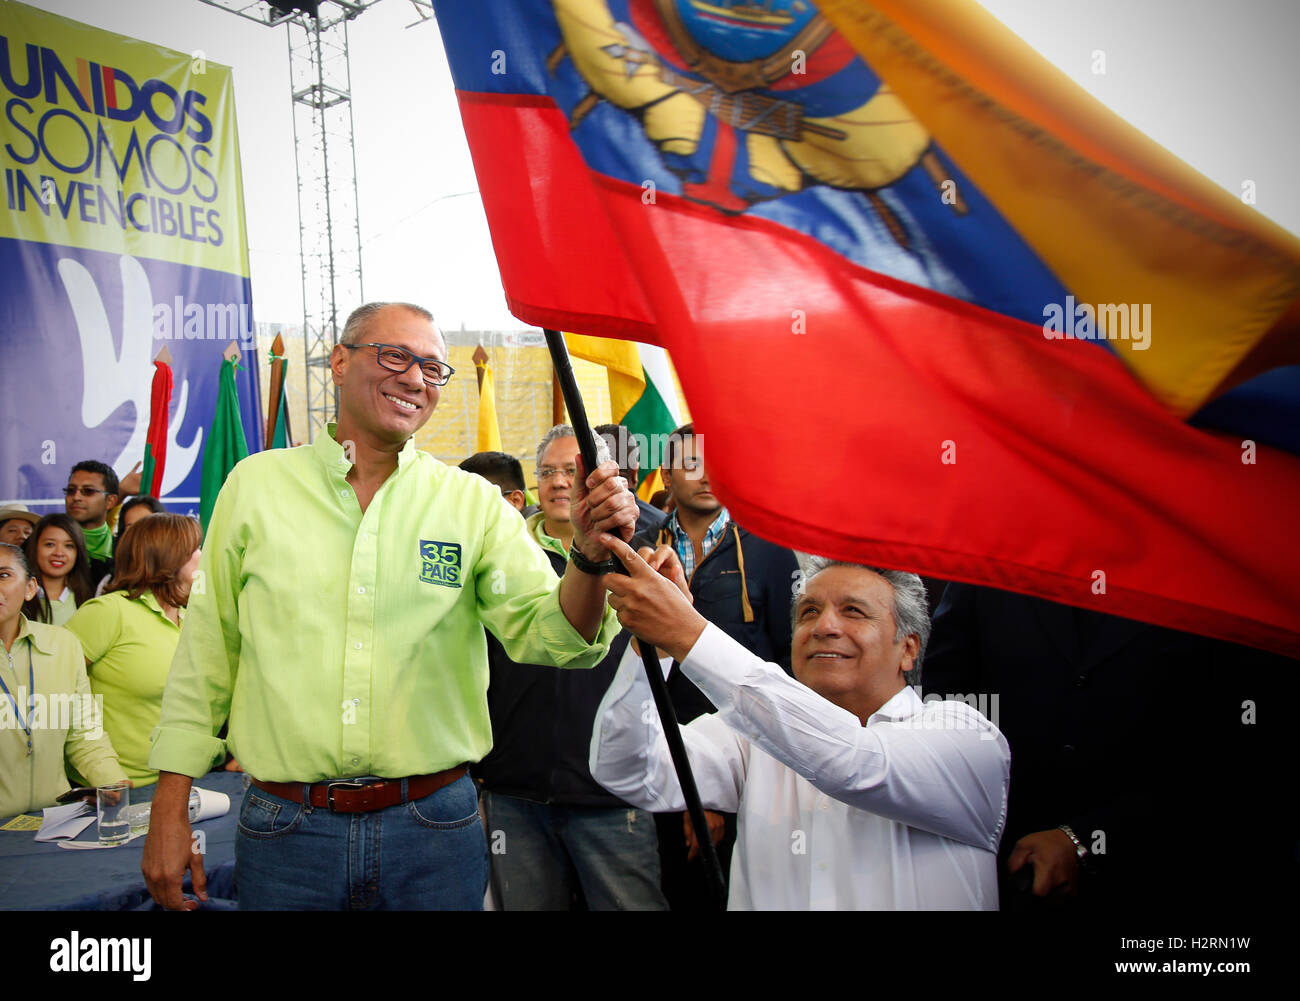 Quito, Ecuador. 1st Oct, 2016. Ecuadorean Vice President Jorge Glas (L) and former Vice President Lenin Moreno (R) take part in the National Convention of the ruling PAIS Alliance Movement in Quito, Ecuador, on Oct. 1, 2016. The PAIS Alliance Movement on Saturday declared Lenin Moreno as presidential candidate for the next general election. Credit:  Santiago Armas/Xinhua/Alamy Live News Stock Photo